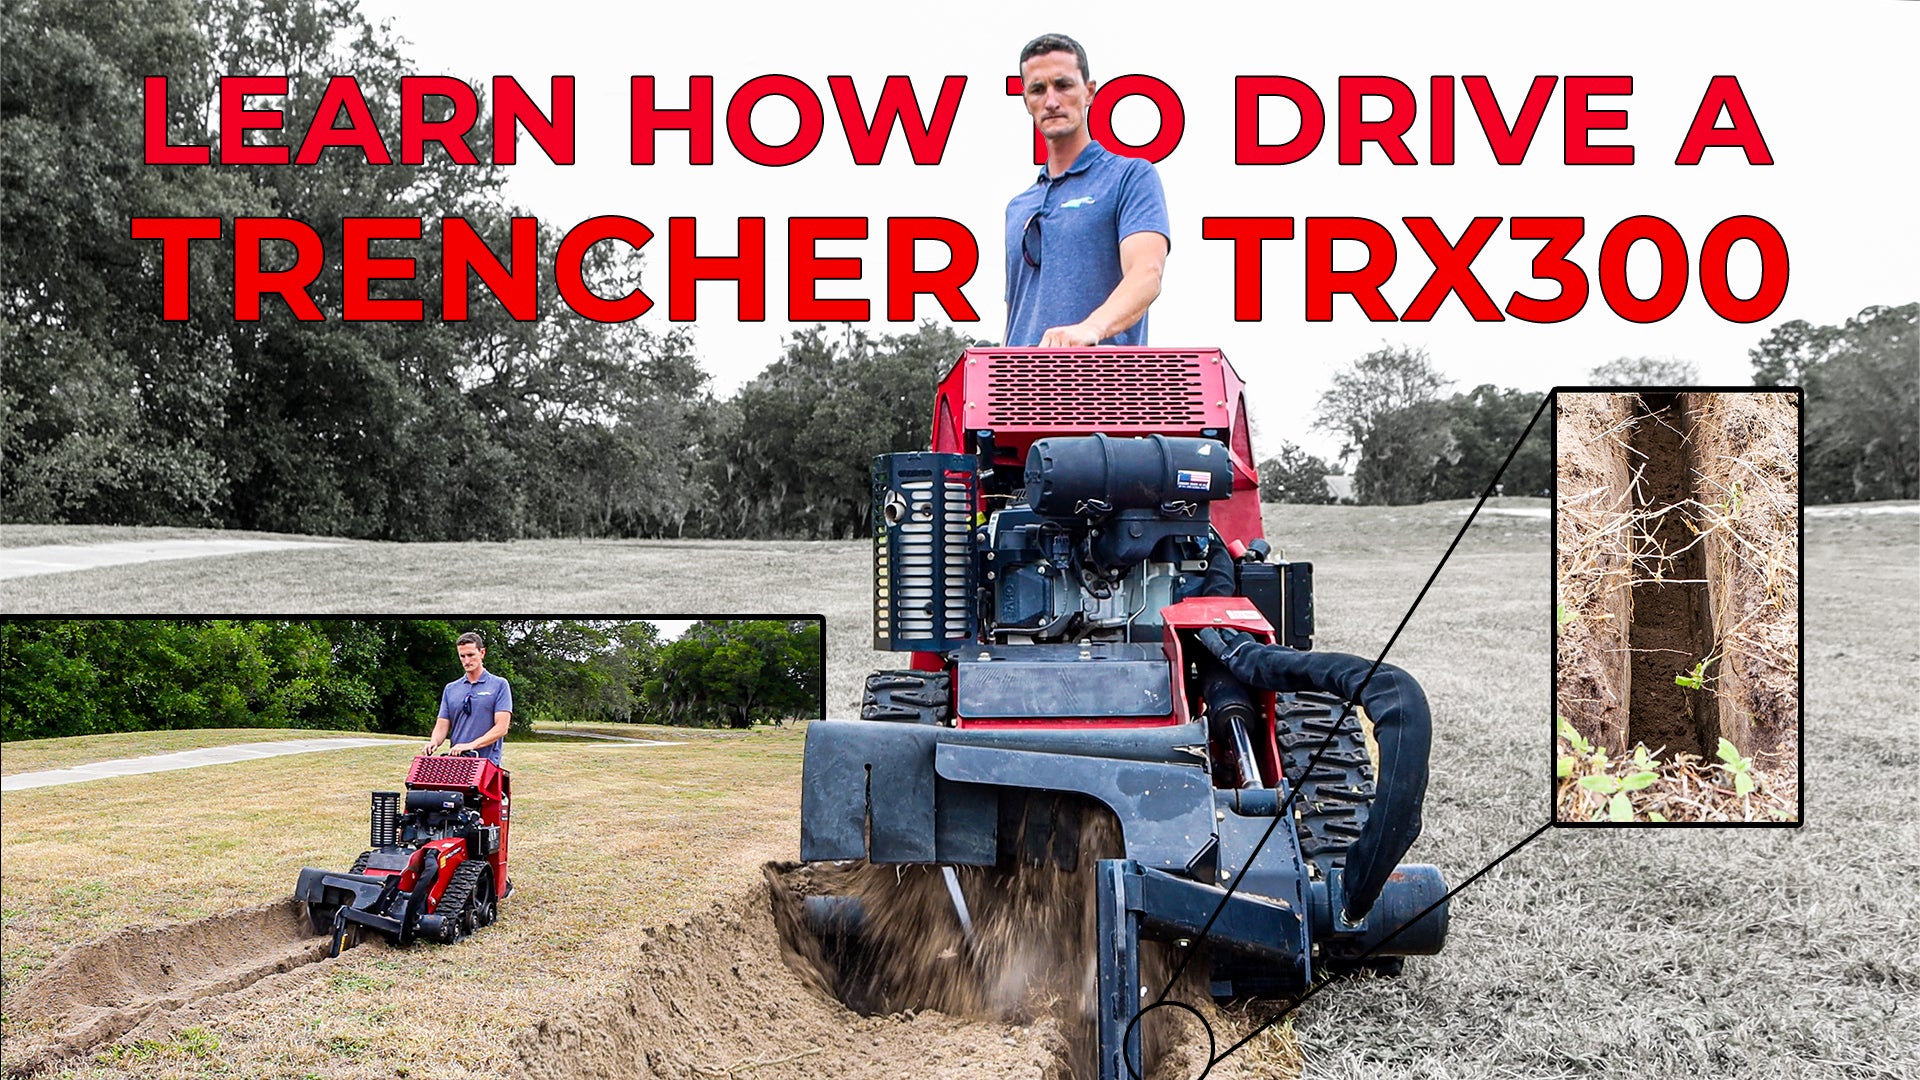 Learning session with Stu from Main Street Mower managing the powerful Toro TRX300 trencher machine.